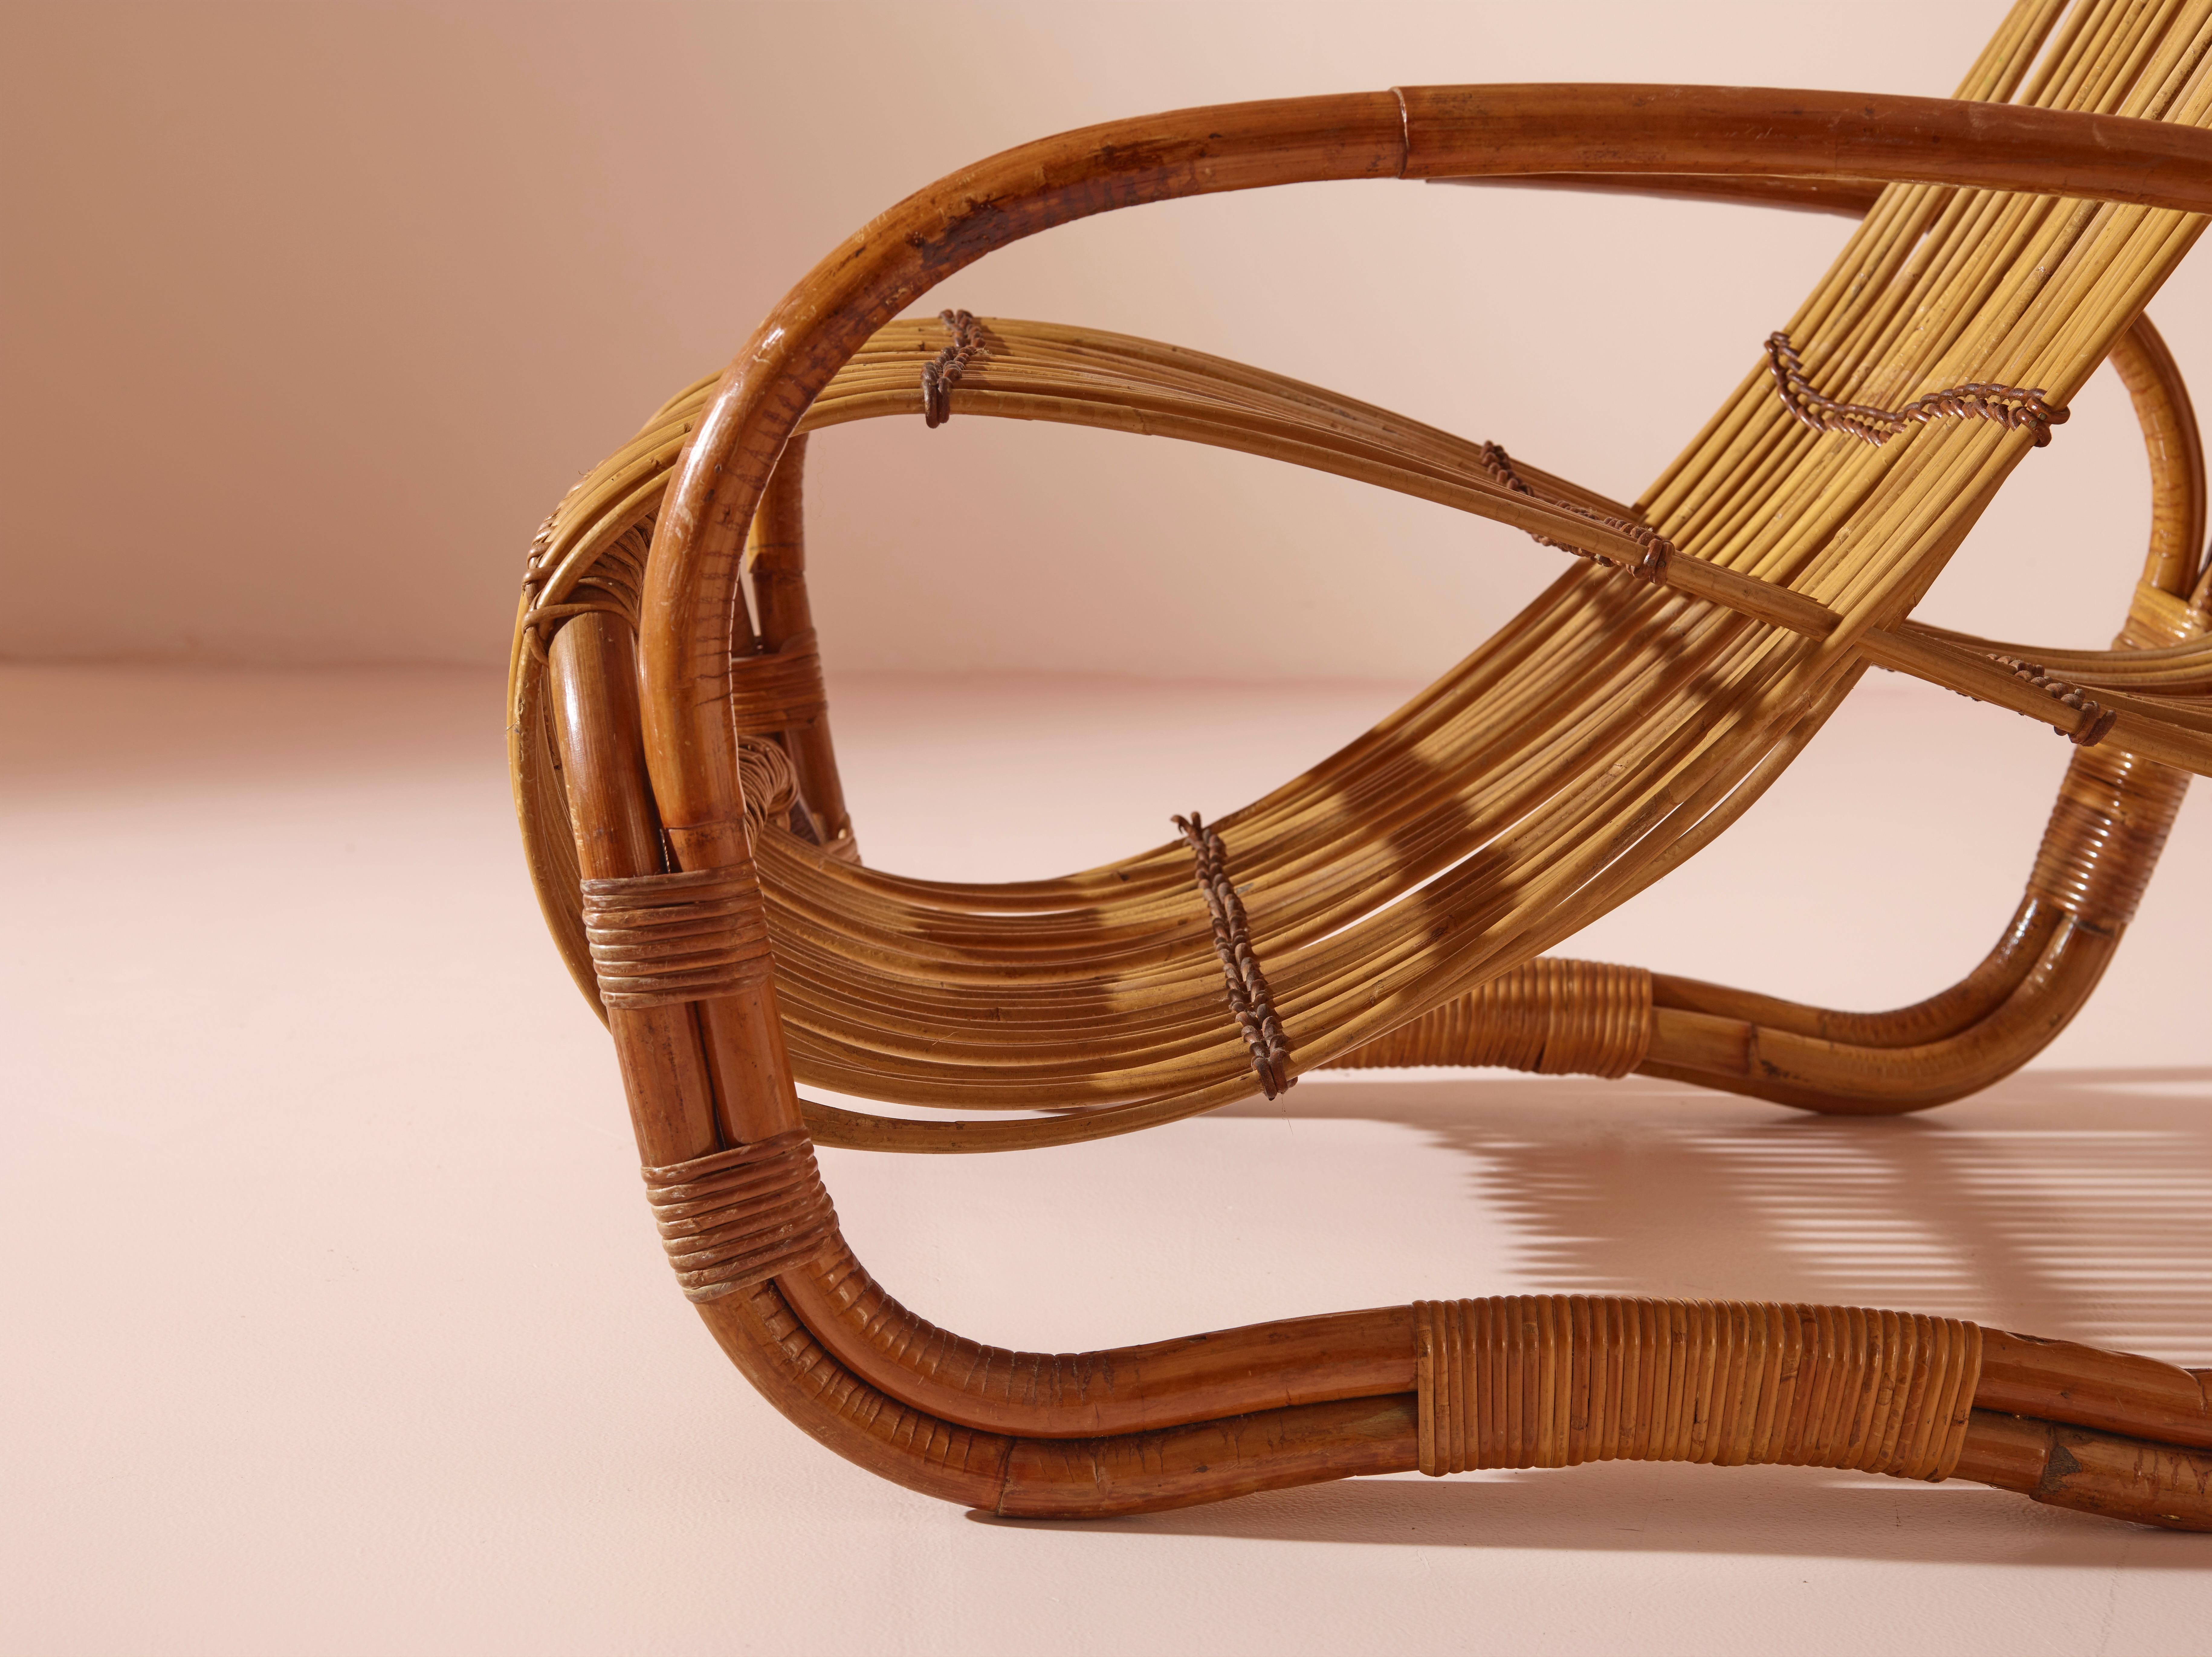 Bamboo Raffaella Crespi attributed bamboo lounge chair, Italy, 1960s For Sale